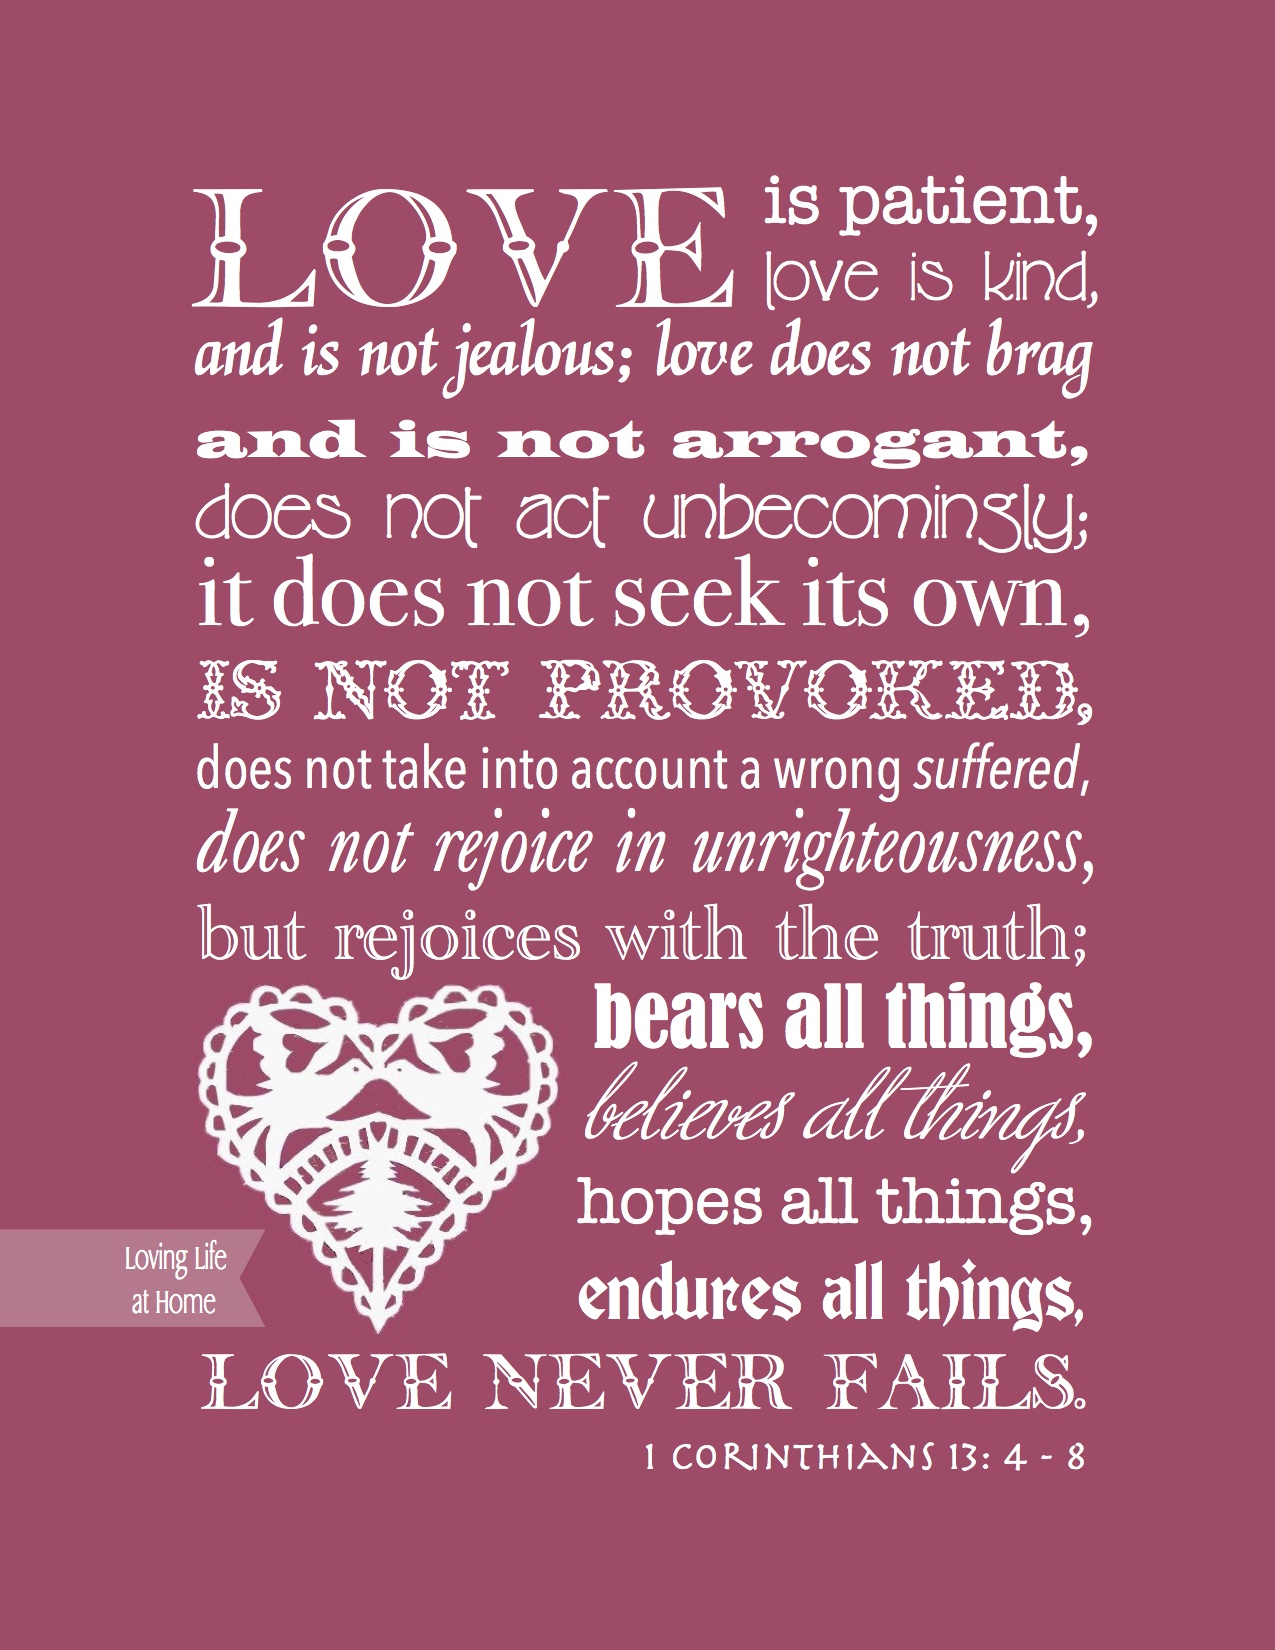 8 Best Images Of 1 Cor 13 Printable 1 Corinthians 16 13 14 These 